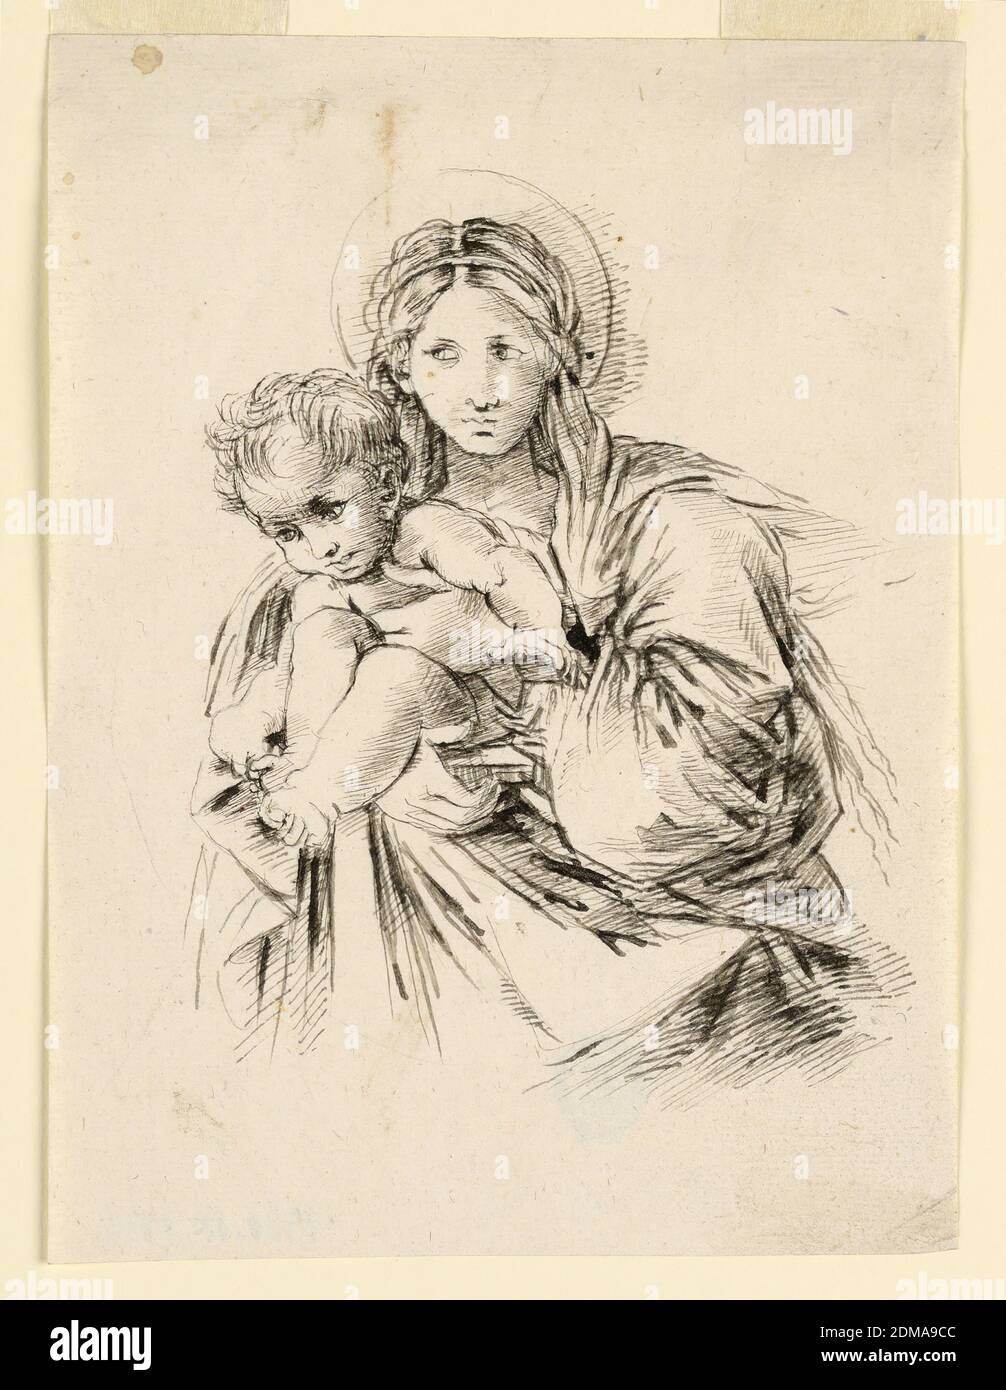 The Virgin with the Child, Fortunato Duranti, Italian, 1787 - 1863, Pen and ink, brush and dark brown watercolor on paper, The halffigure of the Virgin is seen frontally, supporting the back of the Child. He is bending downwards, somewhat to the left., Rome, Italy, 1820-1850, Drawing Stock Photo